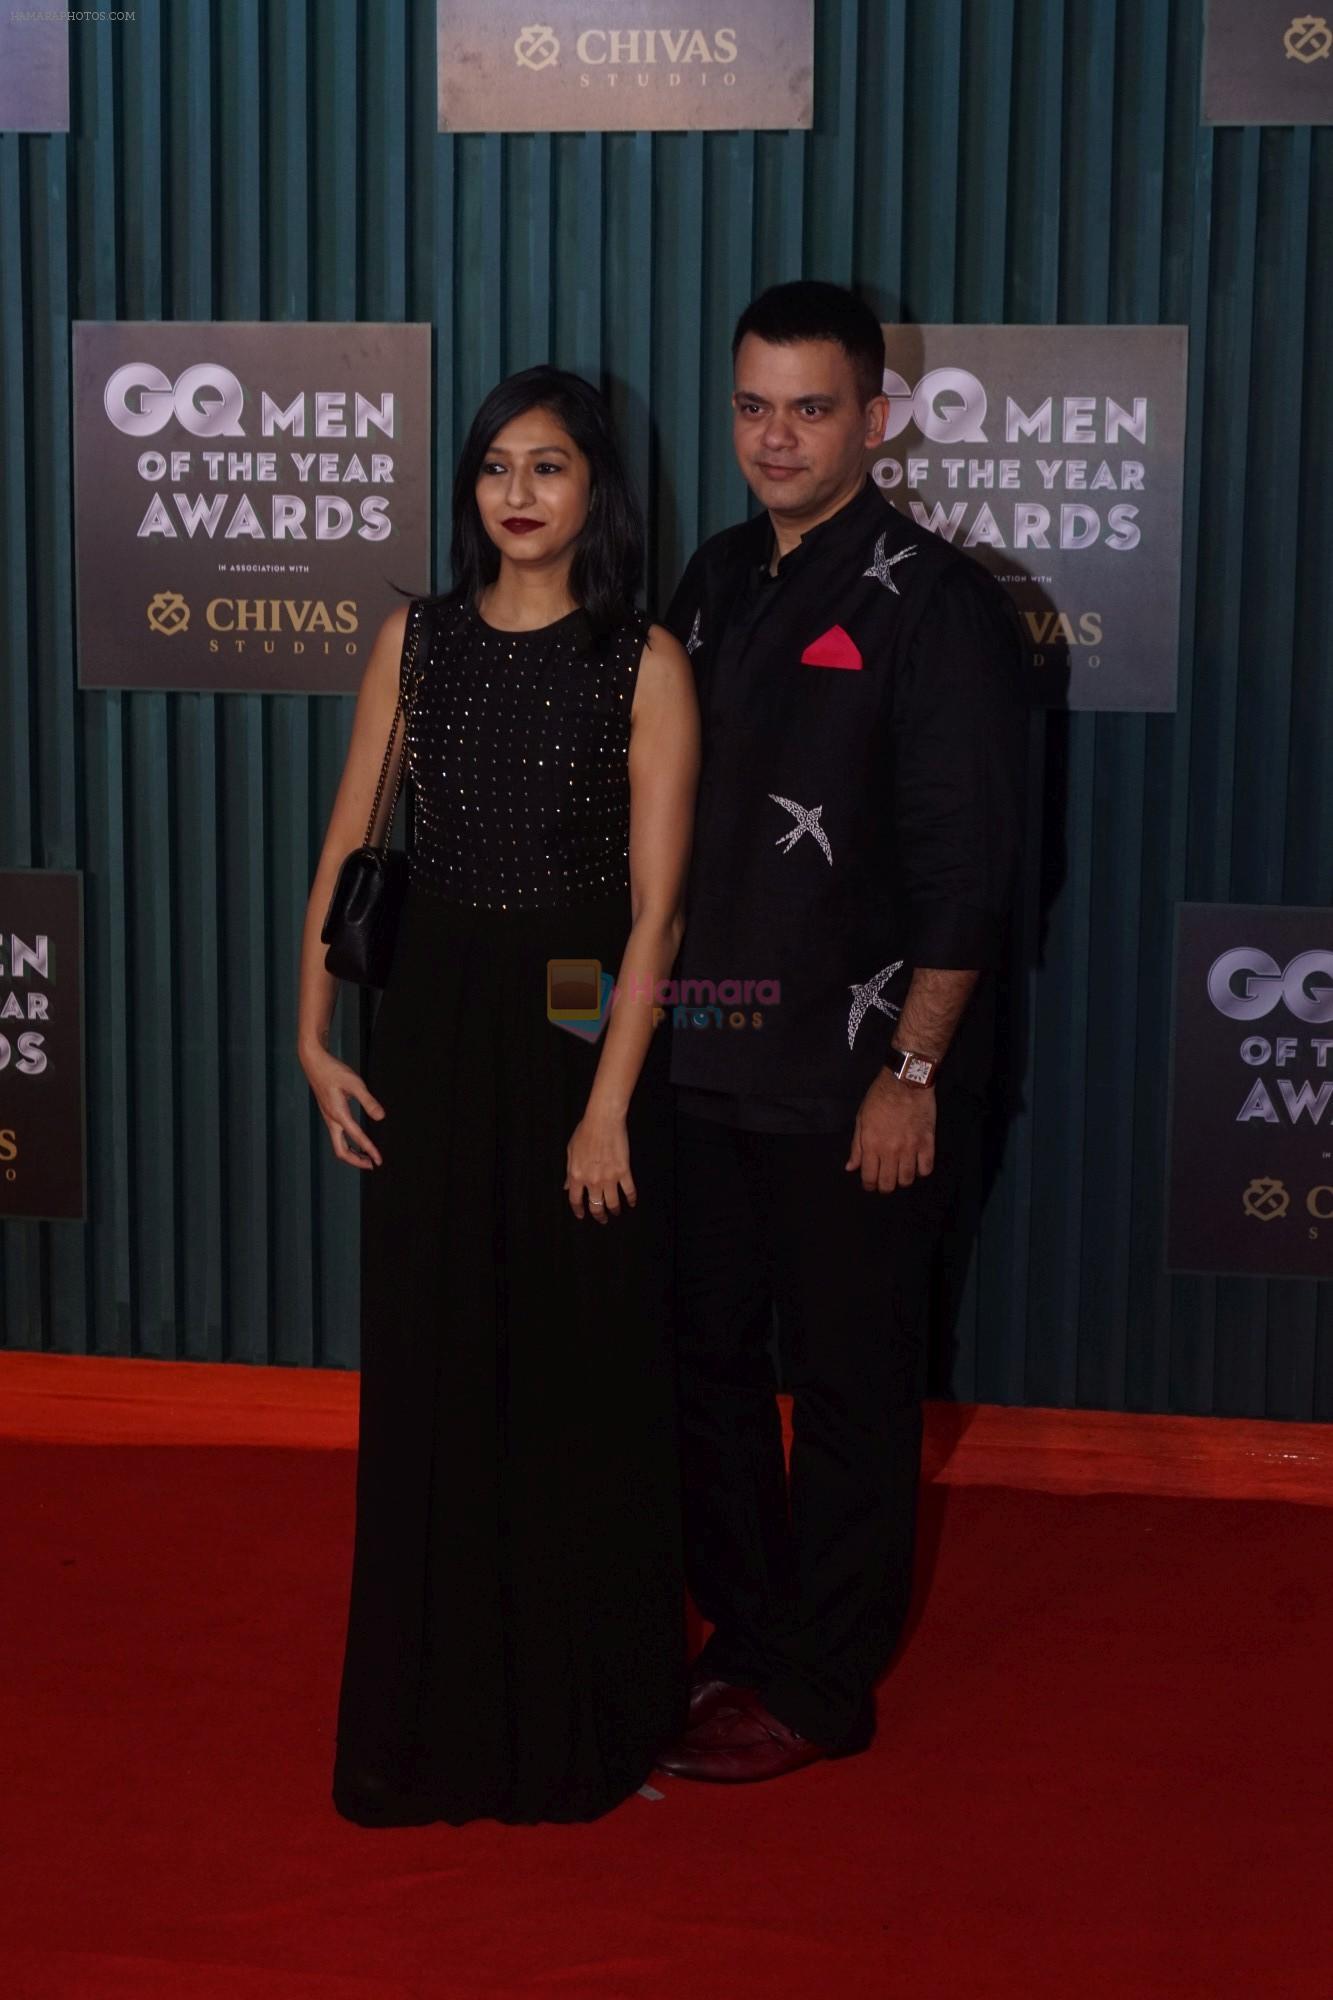 Nachiket Barve at GQ Men of the Year Awards 2018 on 27th Sept 2018